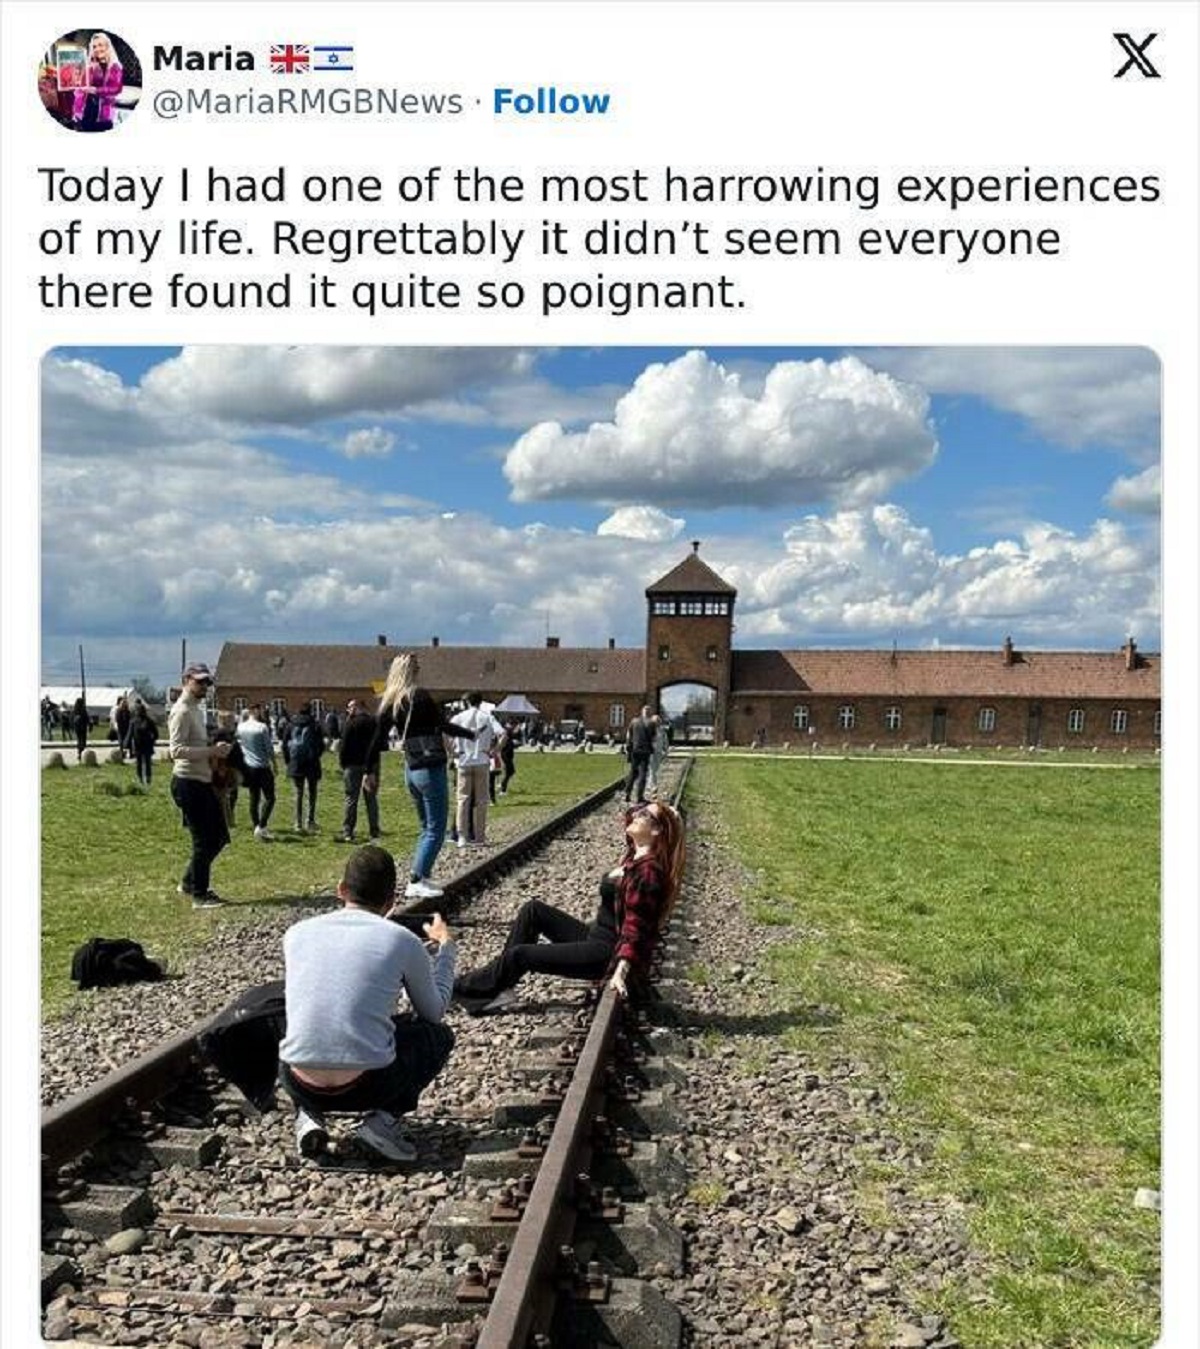 auschwitz tourists - Maria X Today I had one of the most harrowing experiences of my life. Regrettably it didn't seem everyone there found it quite so poignant.